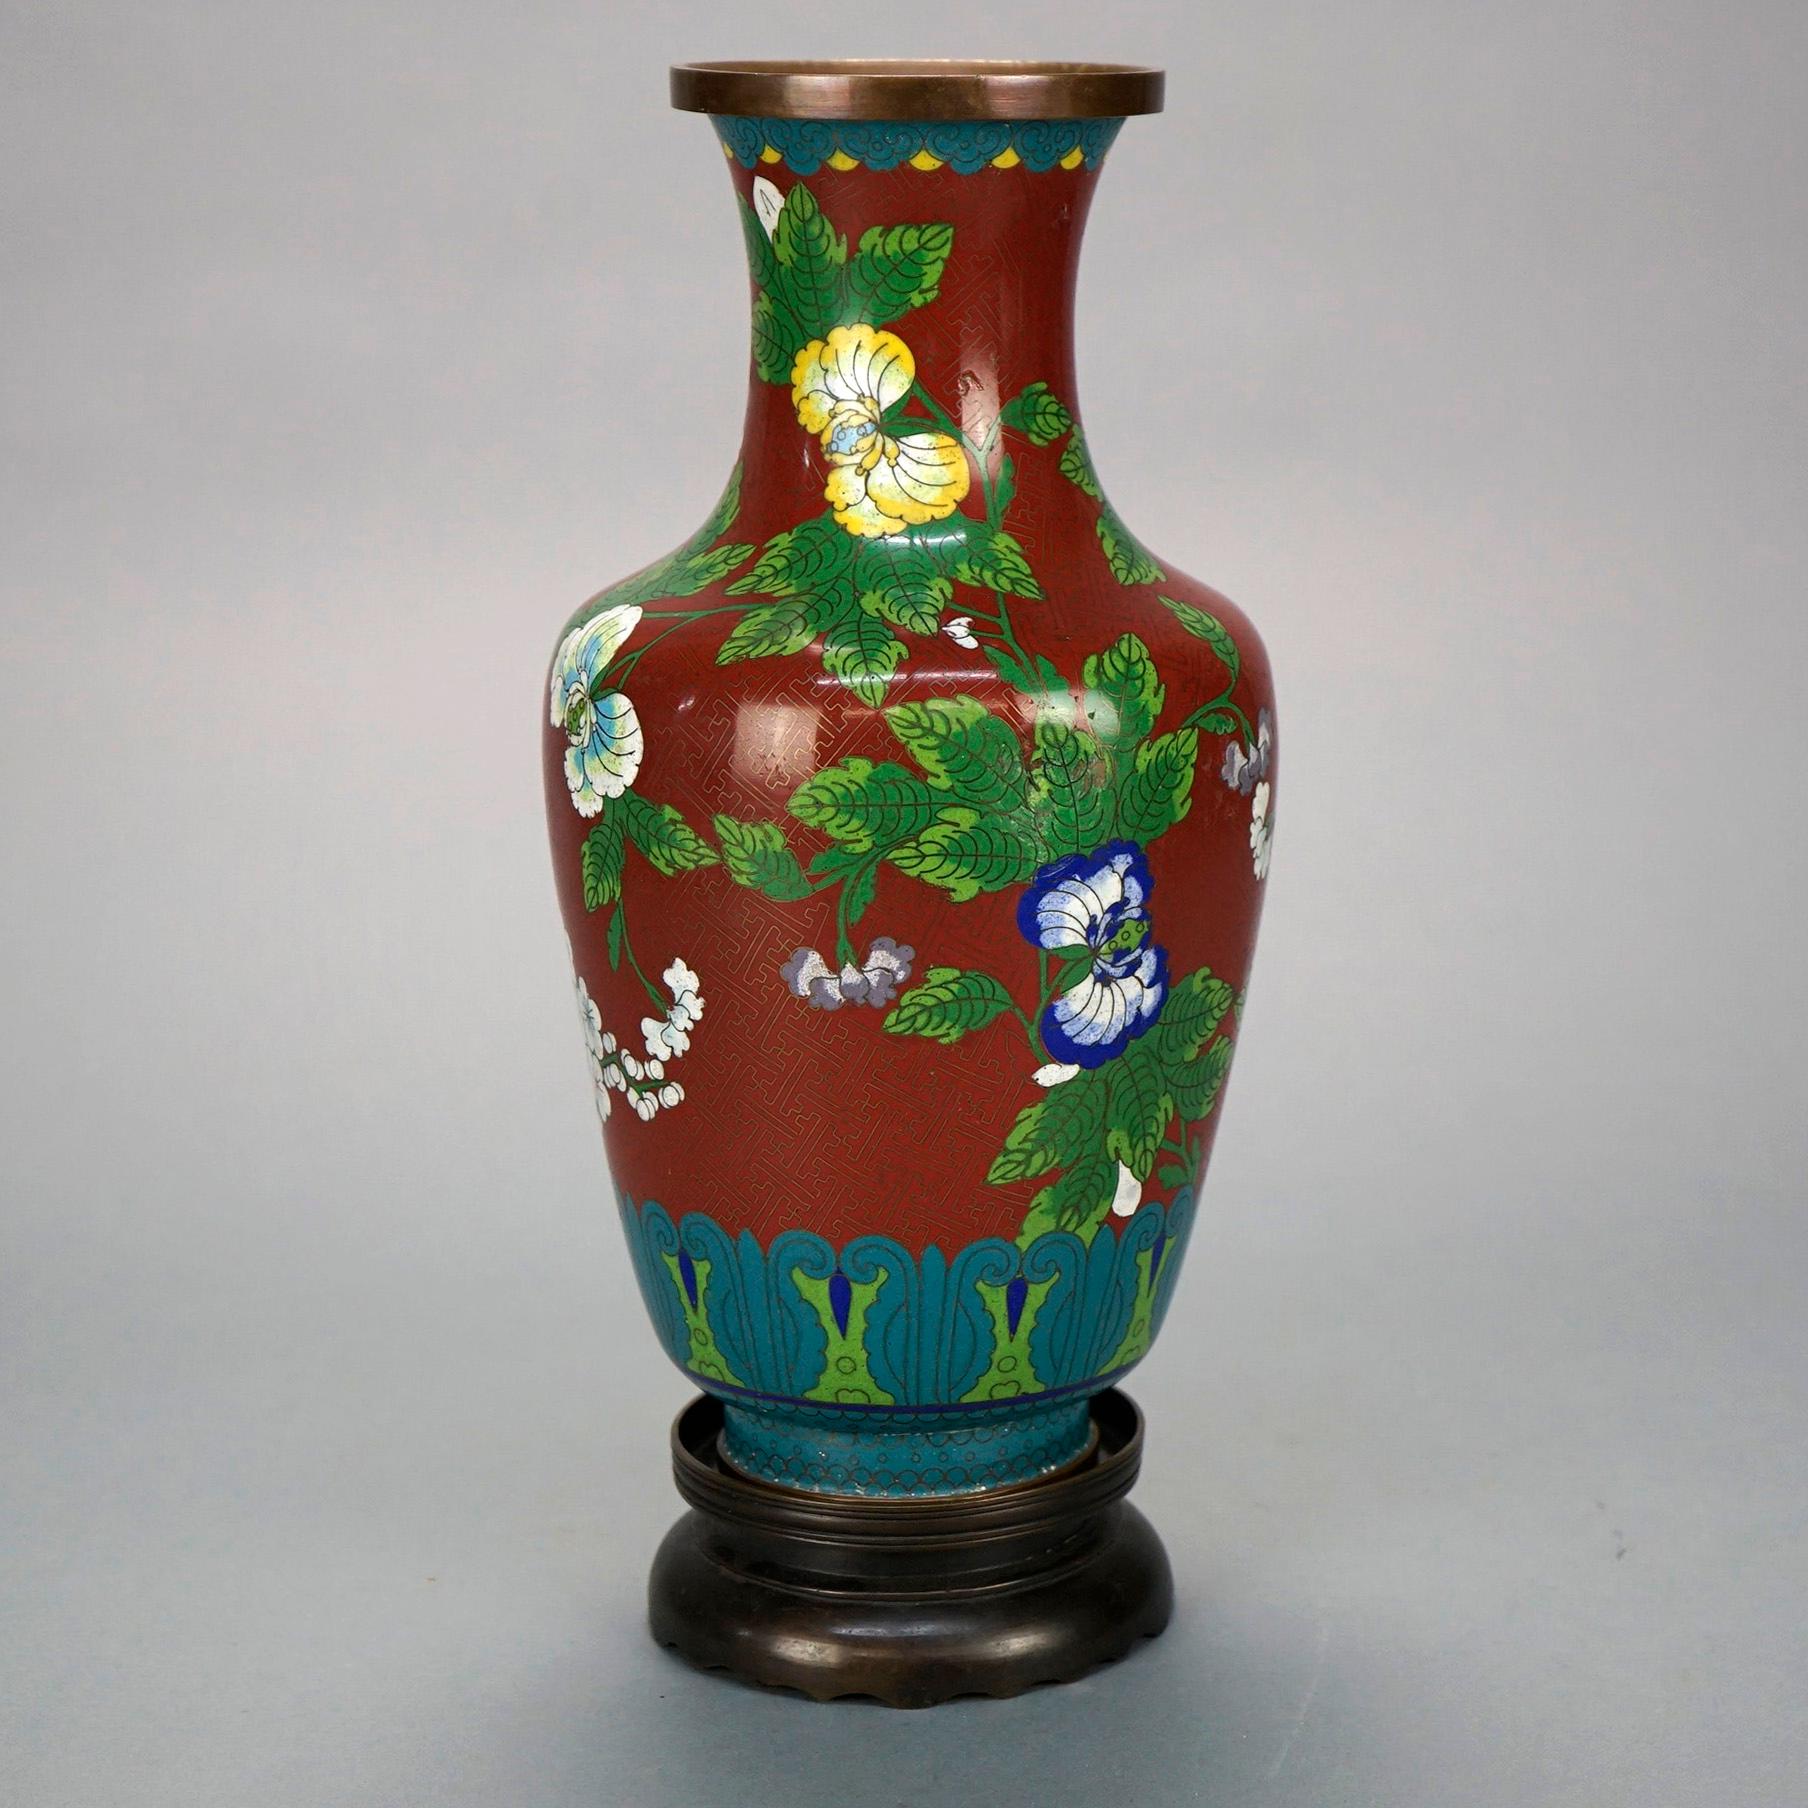 An antique Chinese vase offers Cloissone enameled design in garden theme with flowers throughout, seated on bronze base, c1900.

Measures- Vase 12.5''H; Base 1.75''H; Overall 14''H x 6.25''W x 6.25''D